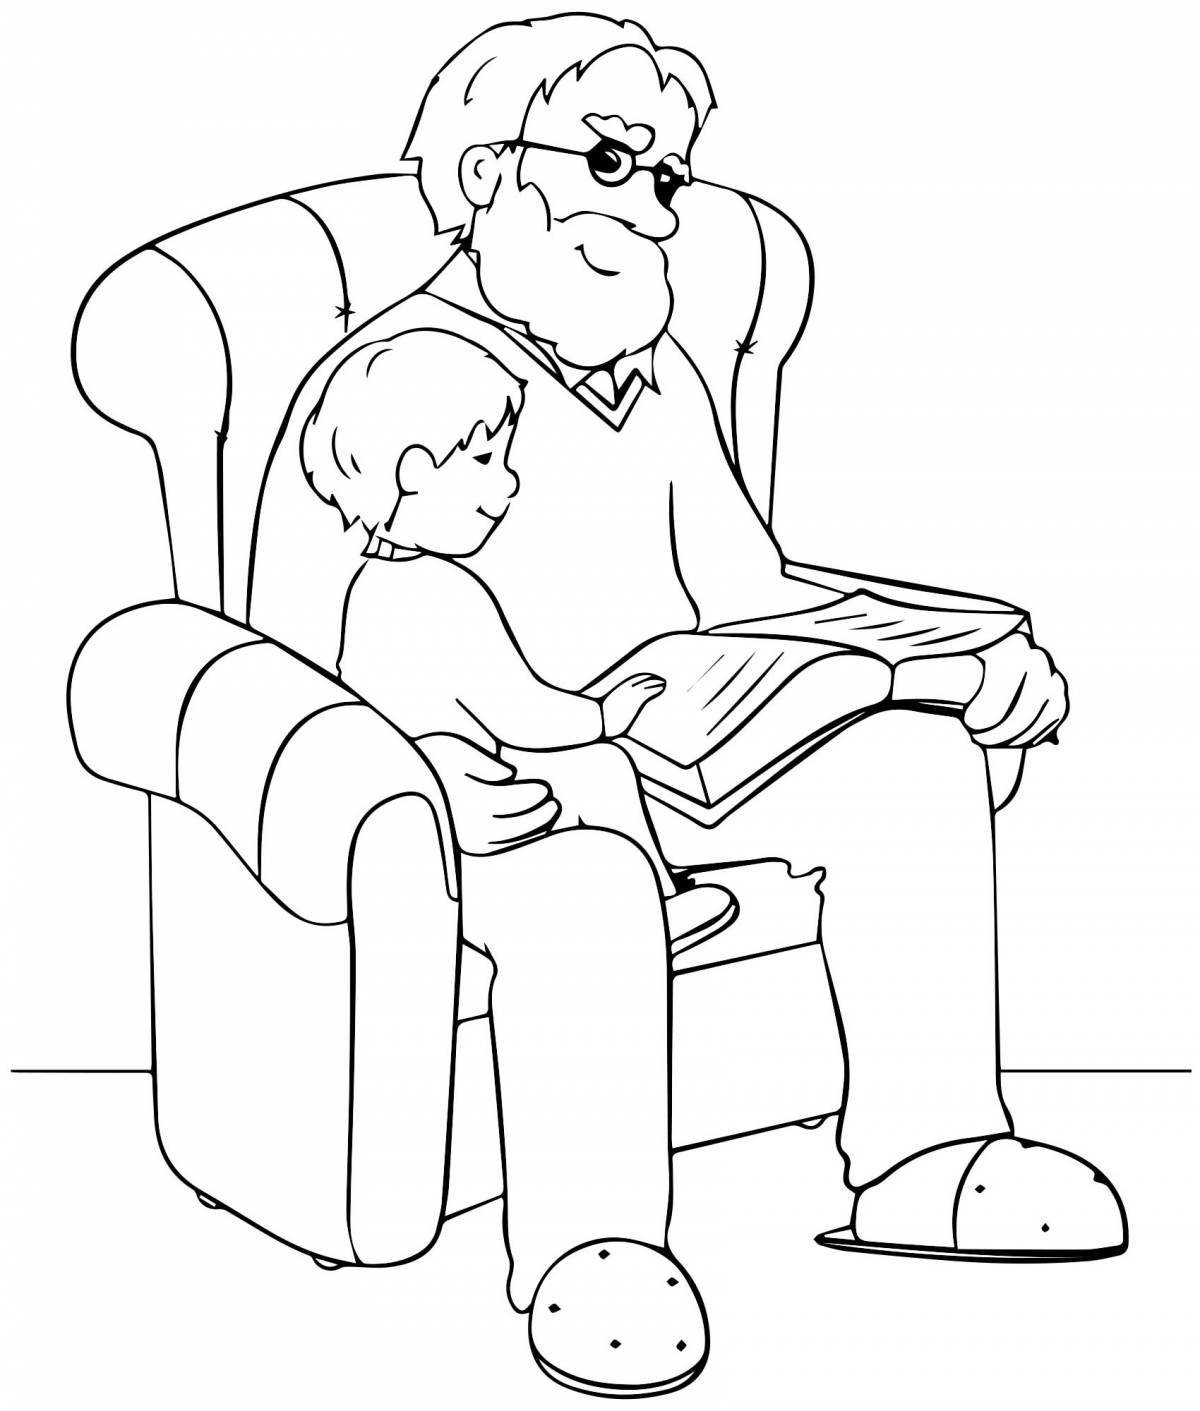 Coloring page happy birthday grandfather from granddaughter